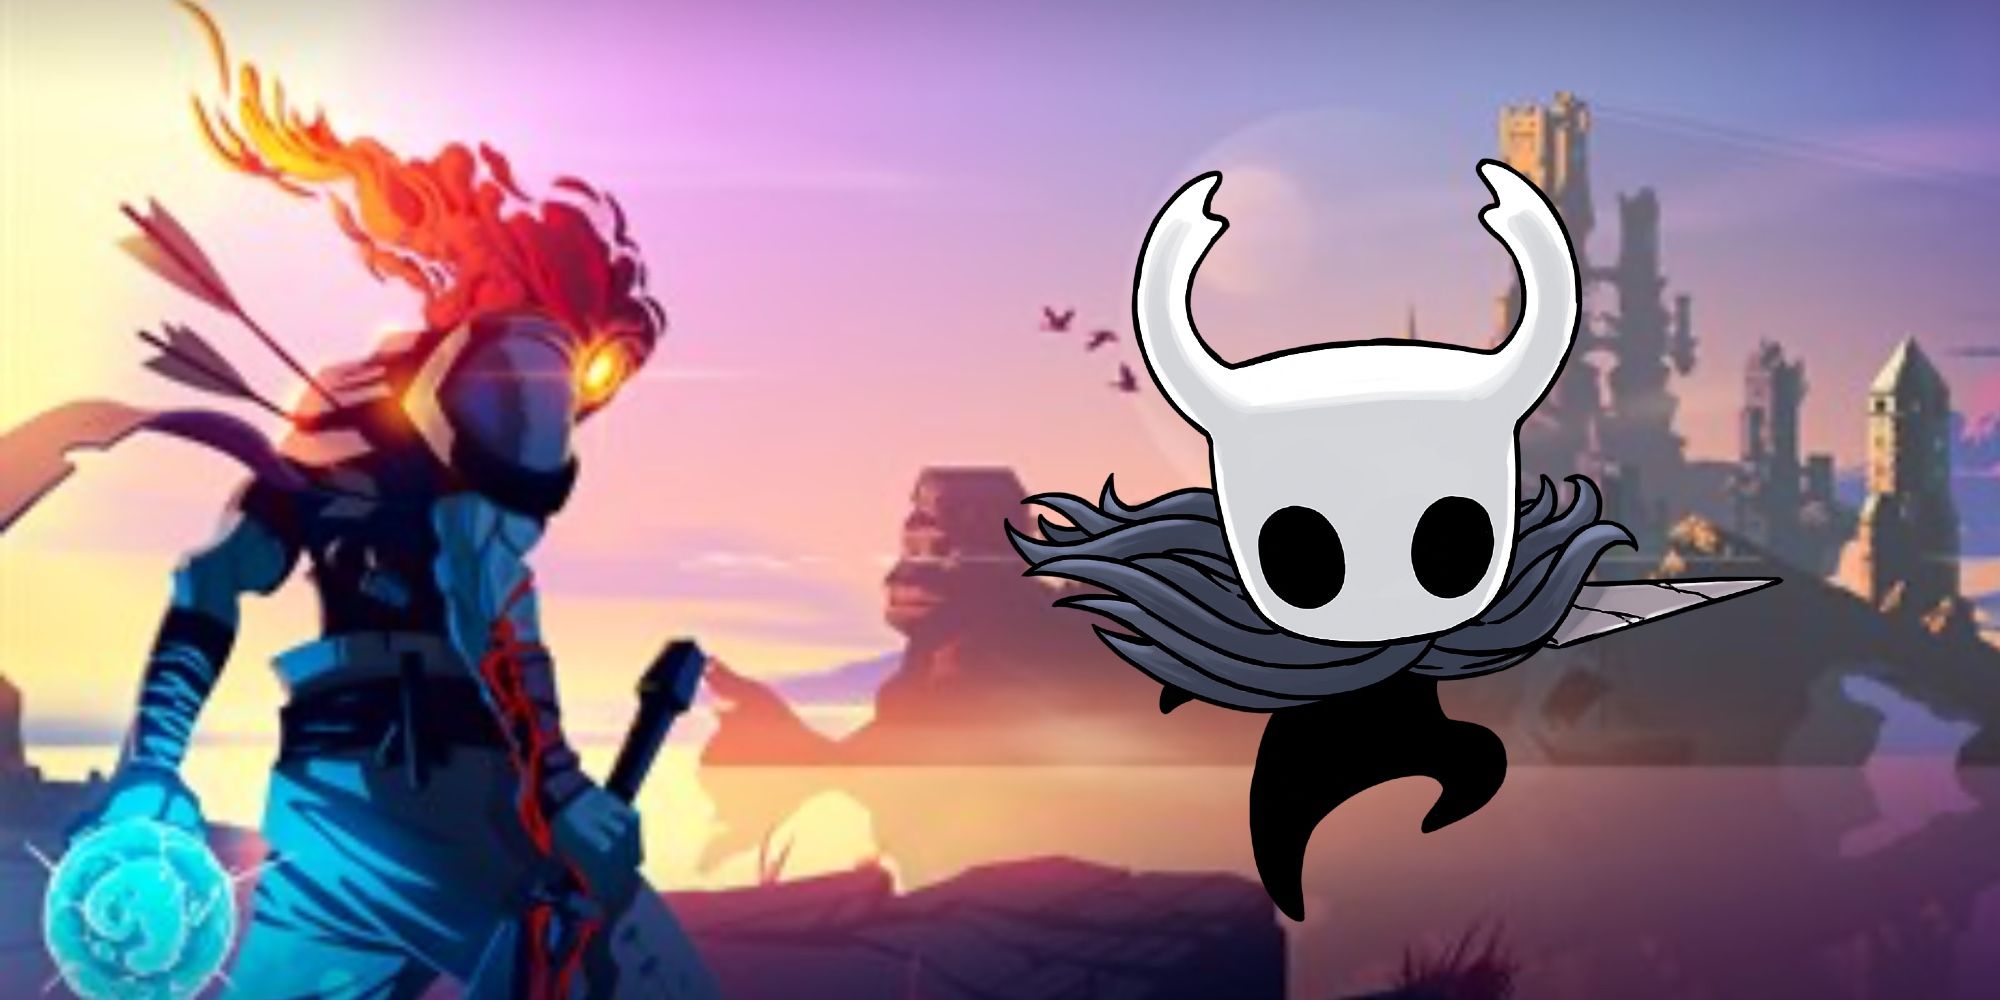 Dead Cells and Hollow Knight